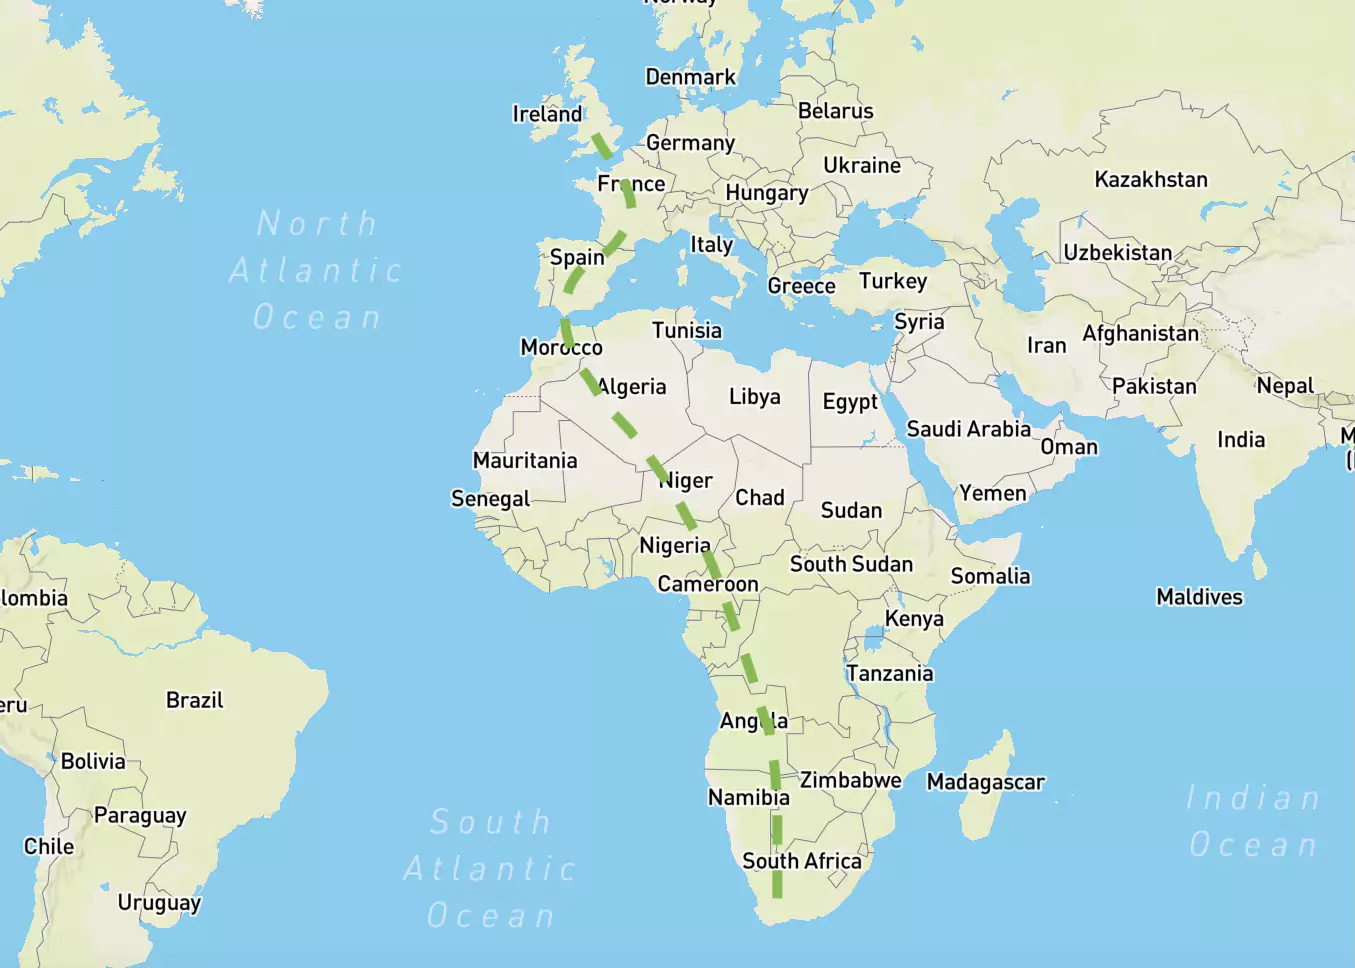 Longest Road Trips in the World You Could Drive - London to Cape Town